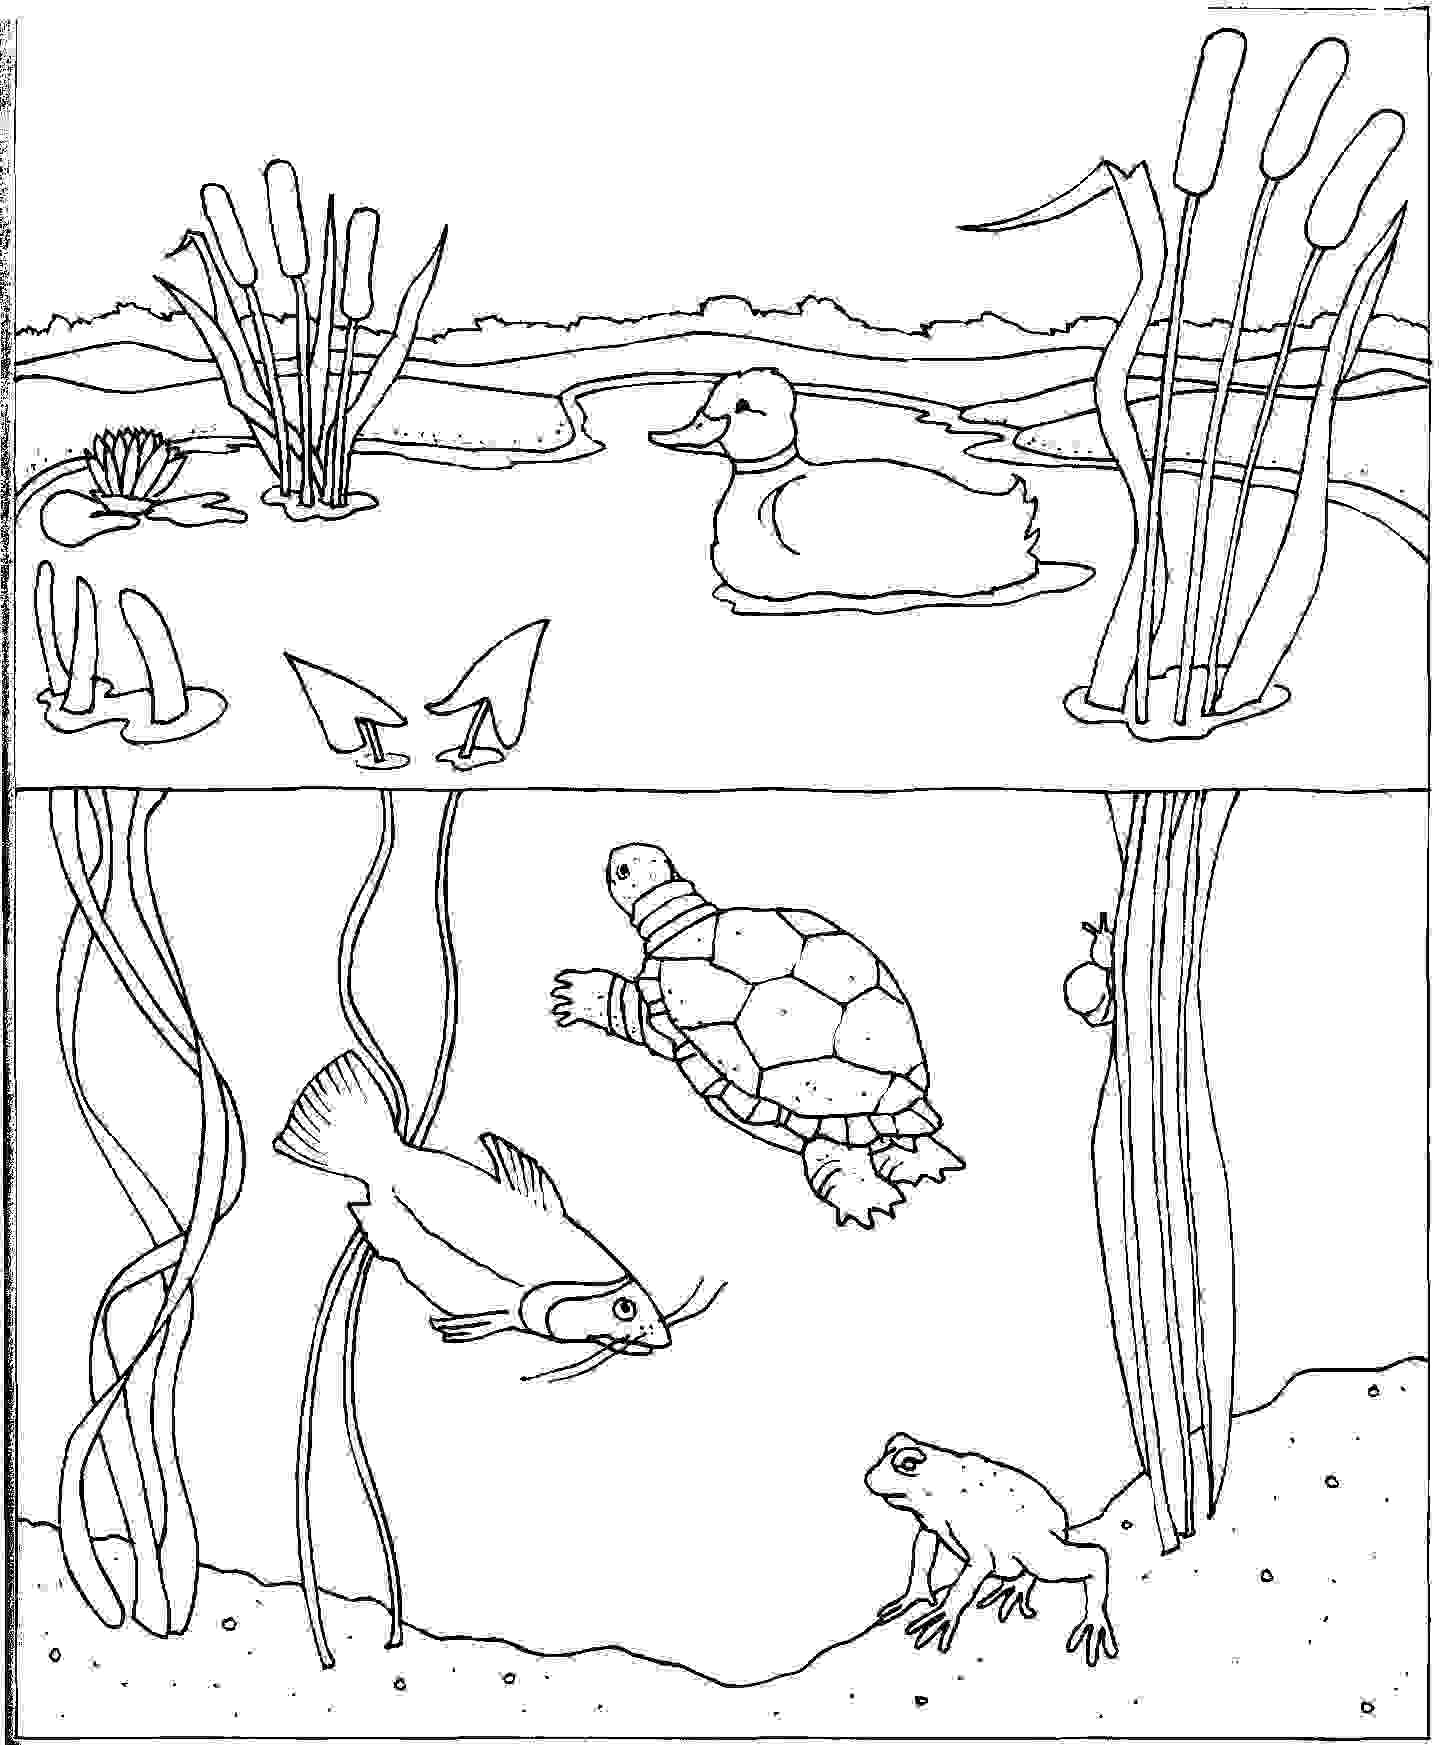  Under Water Coloring Pages |Spring coloring pages